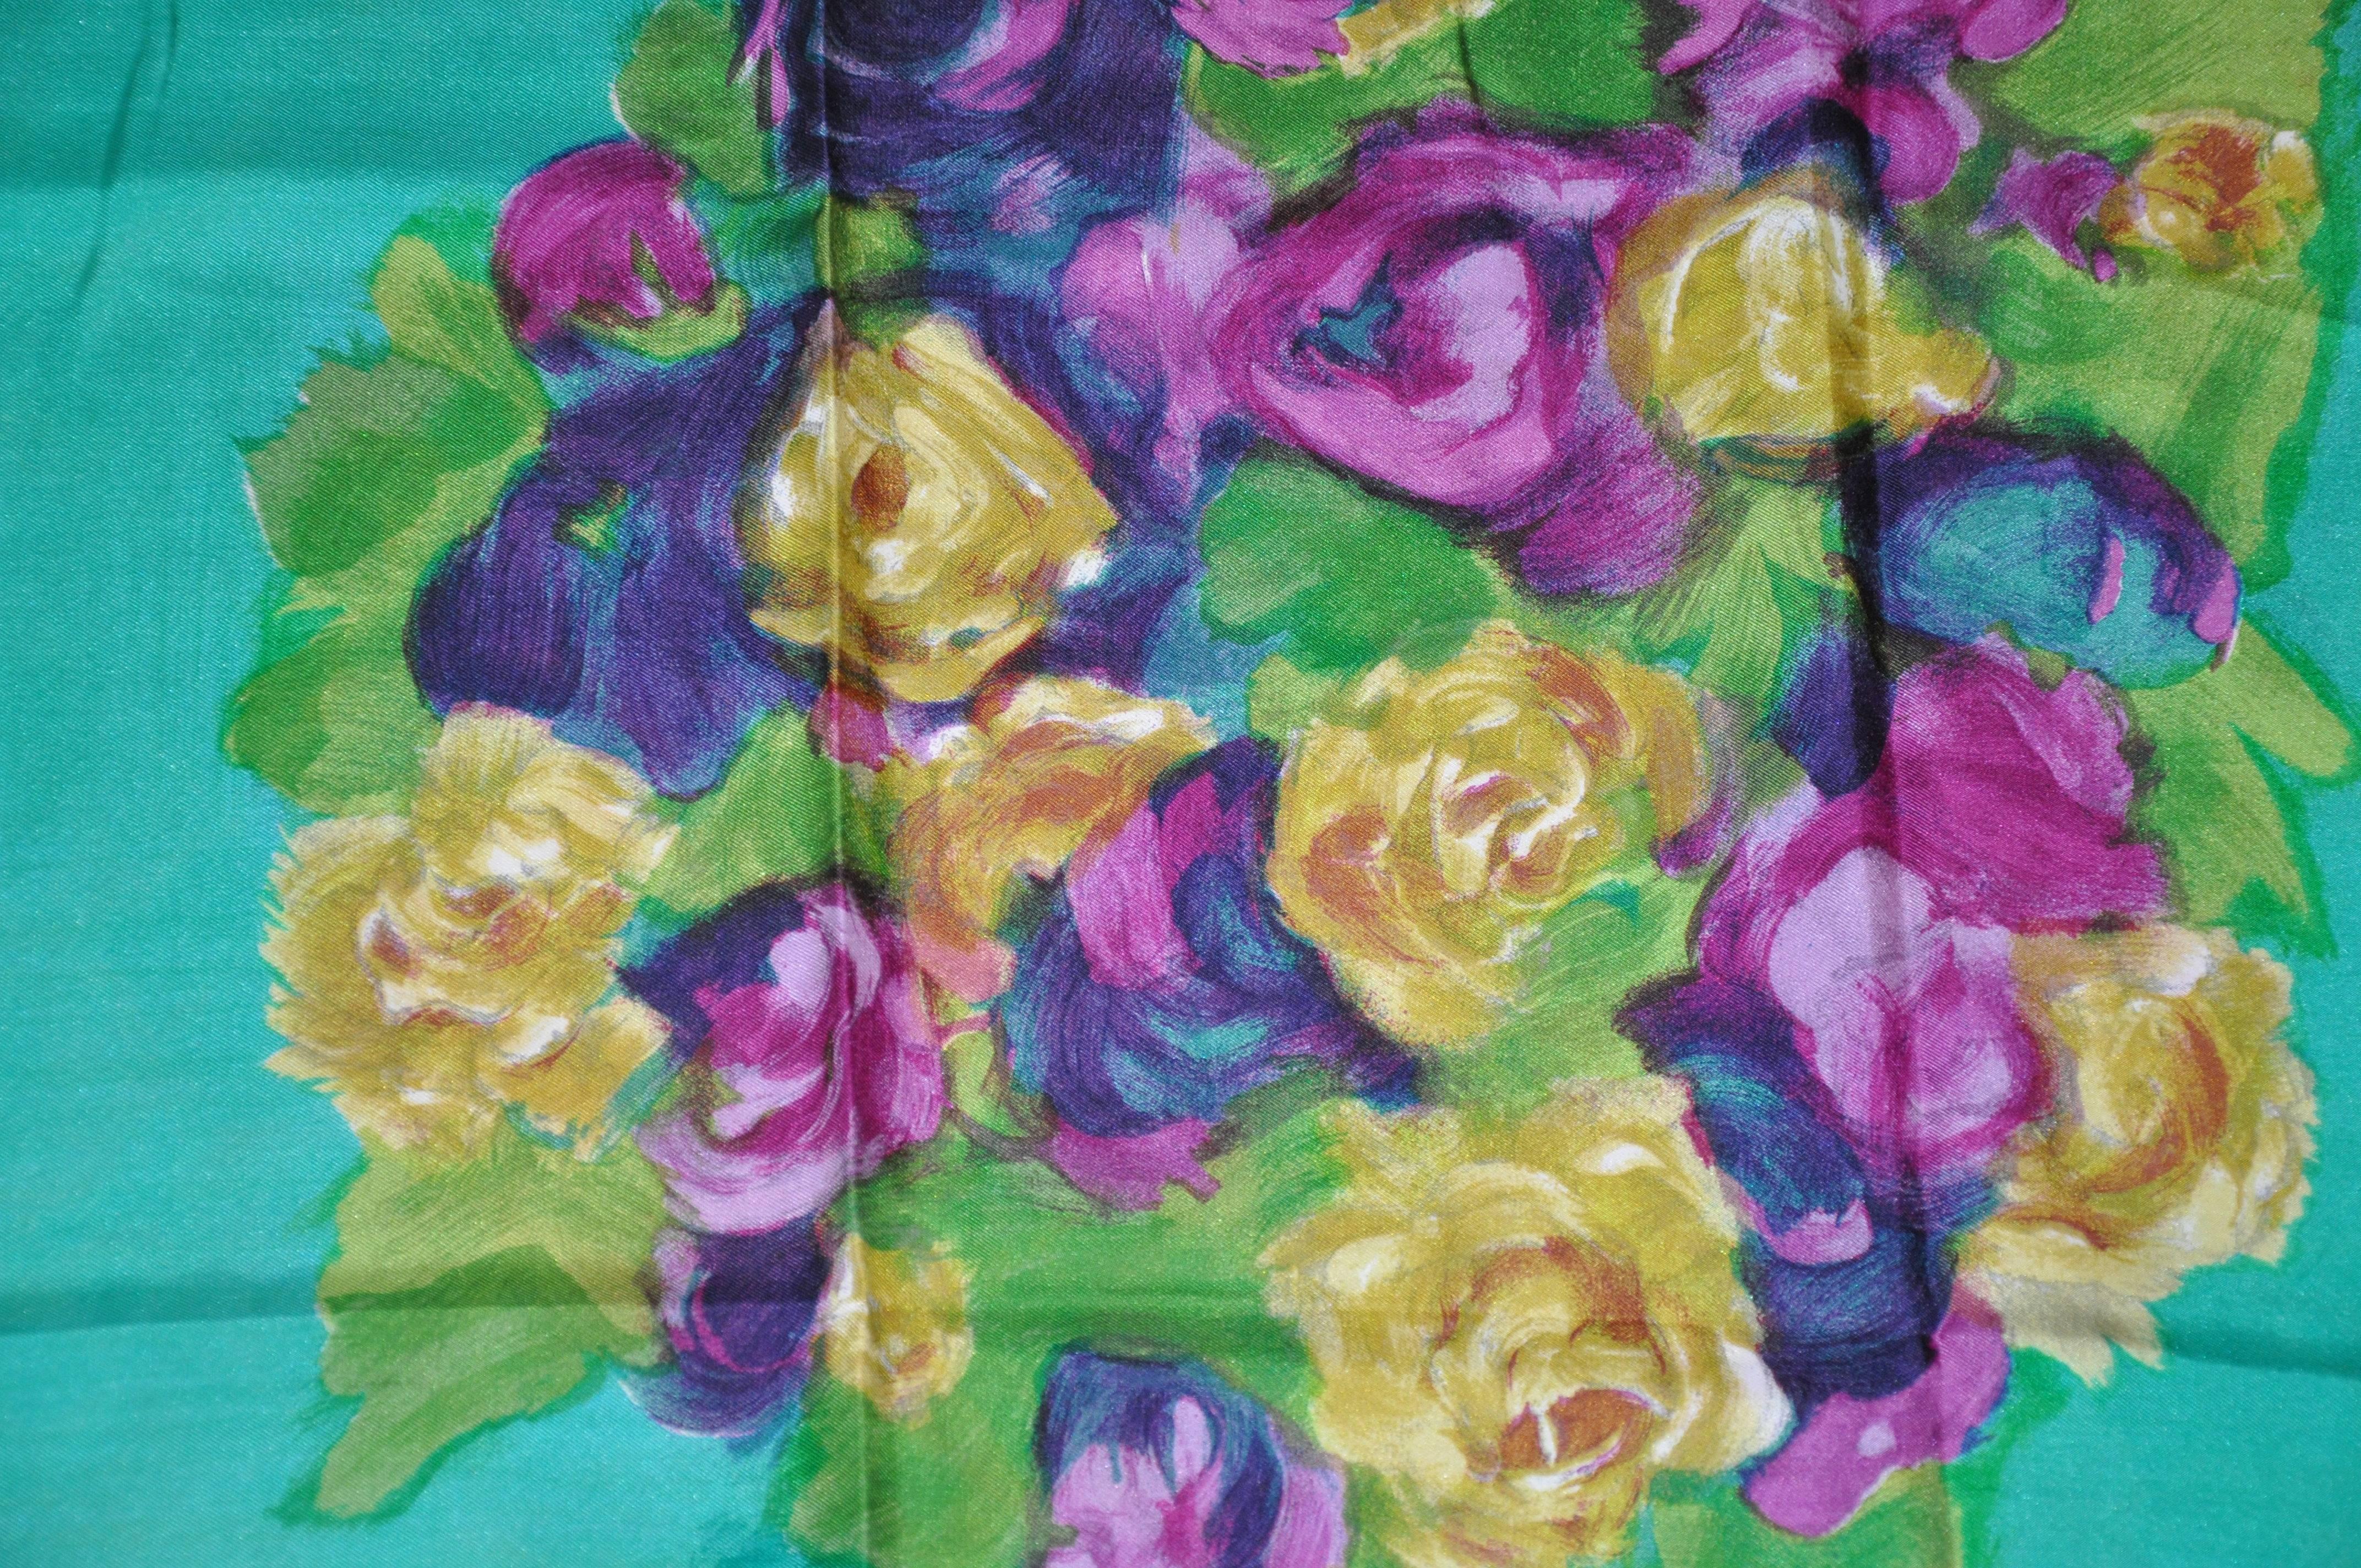 Rare Jean Desses brilliantly vivid "Floral Portrait" silk scarf measures 30" x 30", finished with hand-rolled edges. One side needs slight repair on edge. Made in France.